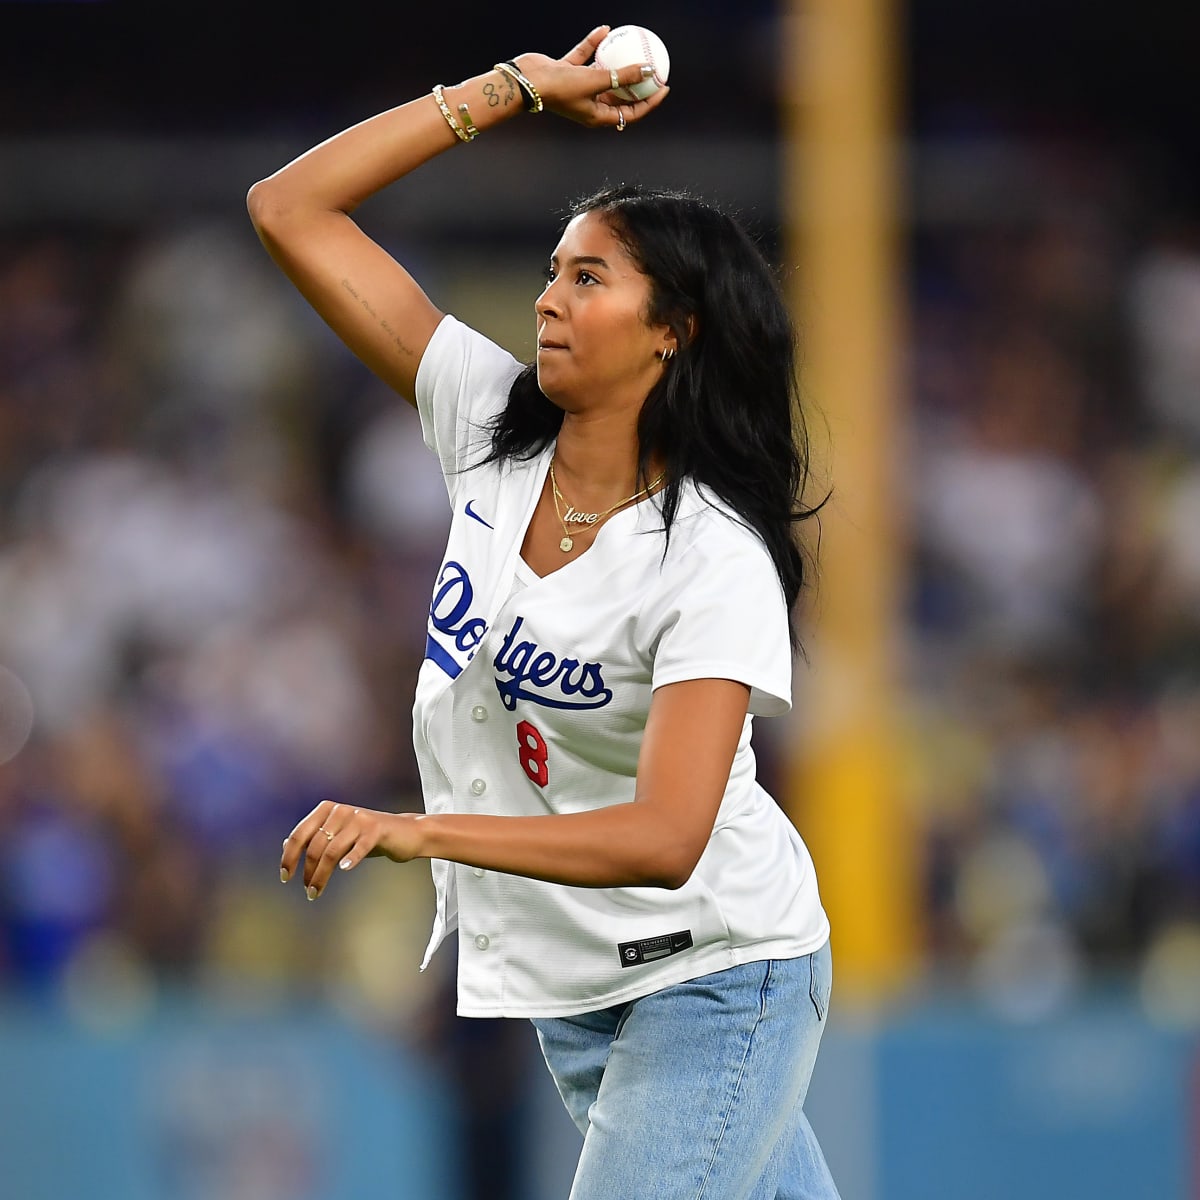 Kobe Bryant's daughter Natalia throws ceremonial first pitch as LA